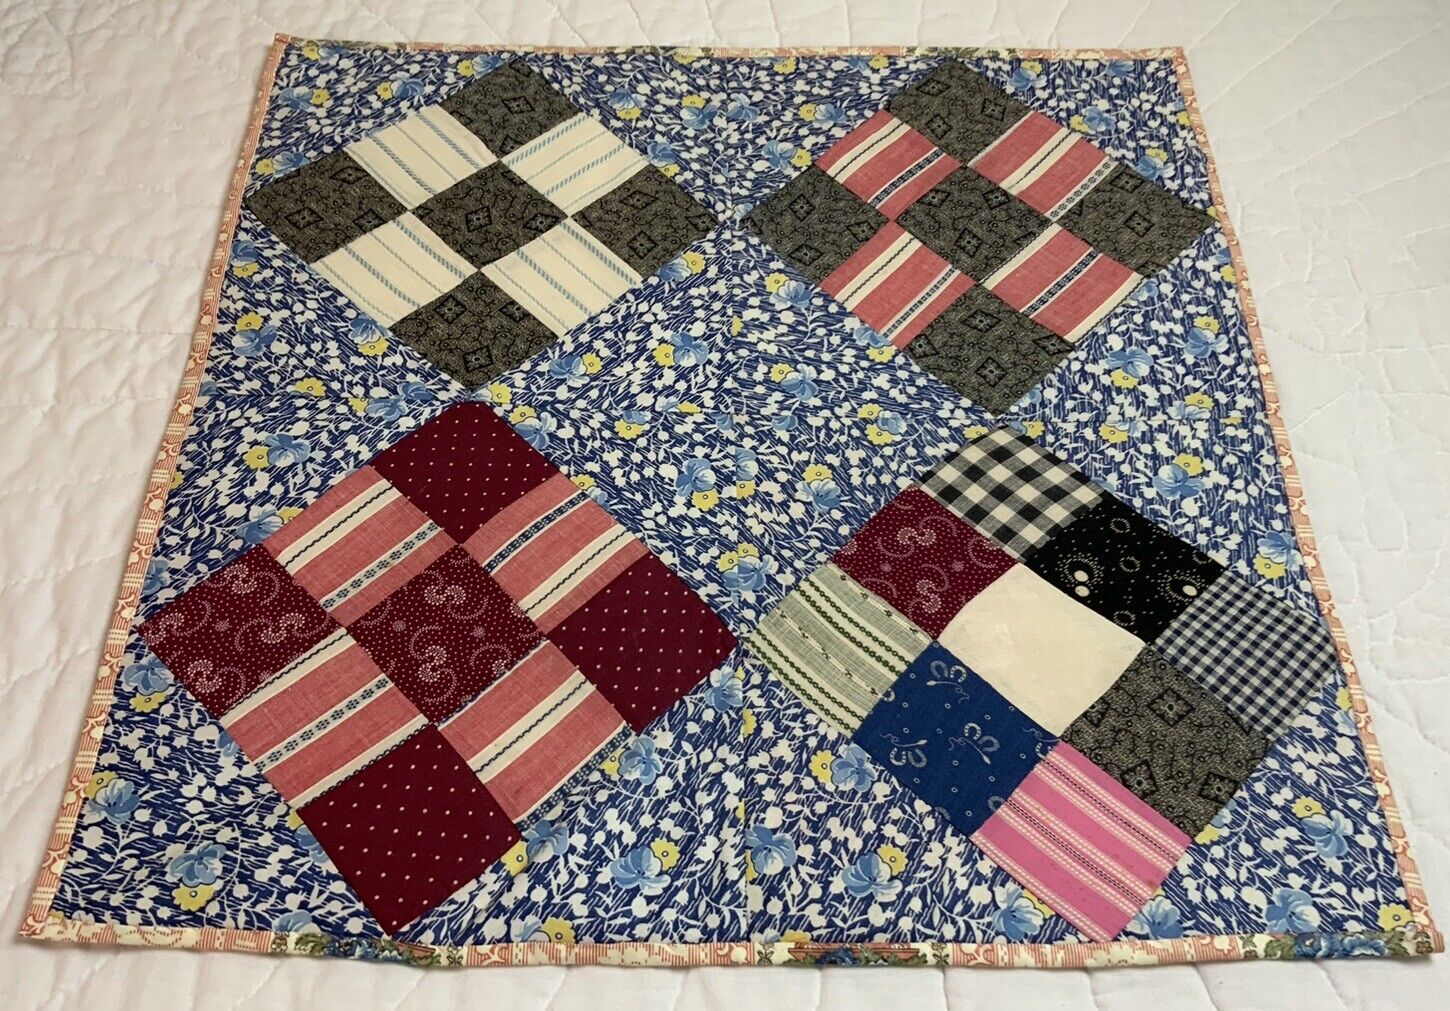 Vintage Antique Patchwork Quilt Table Topper Or Wall Hanging, Nine Patch, Blue